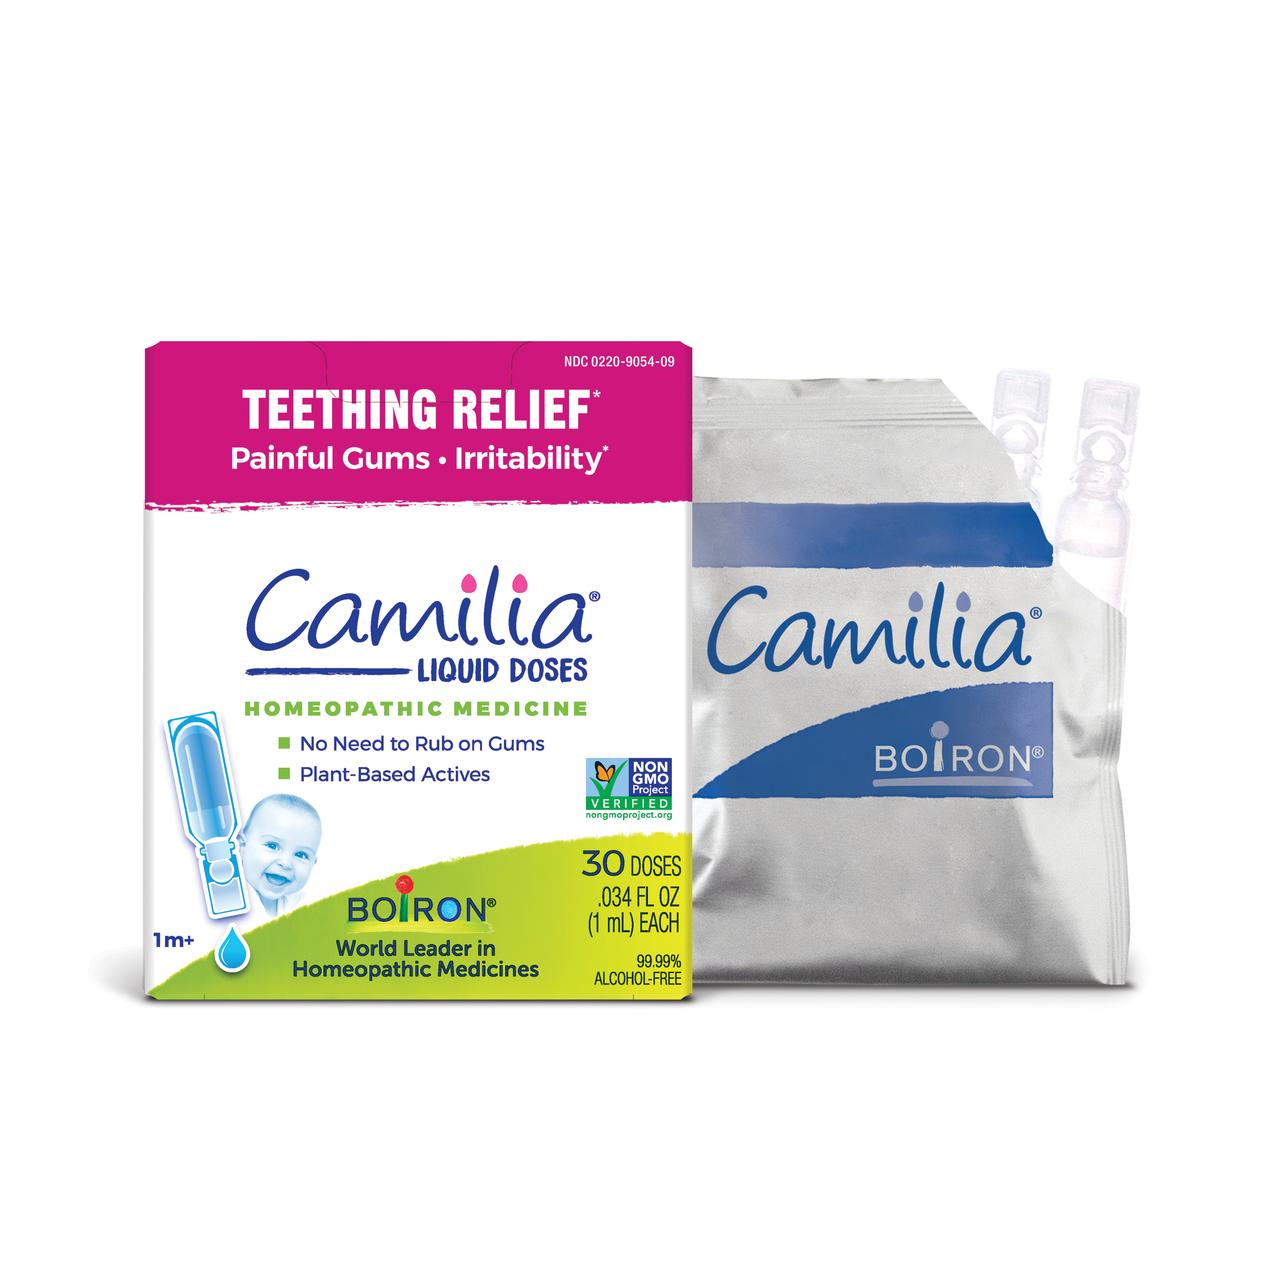 Boiron Camilia, Homeopathic Medicine for Teething Relief, 30 Single Liquid Doses - image 4 of 11